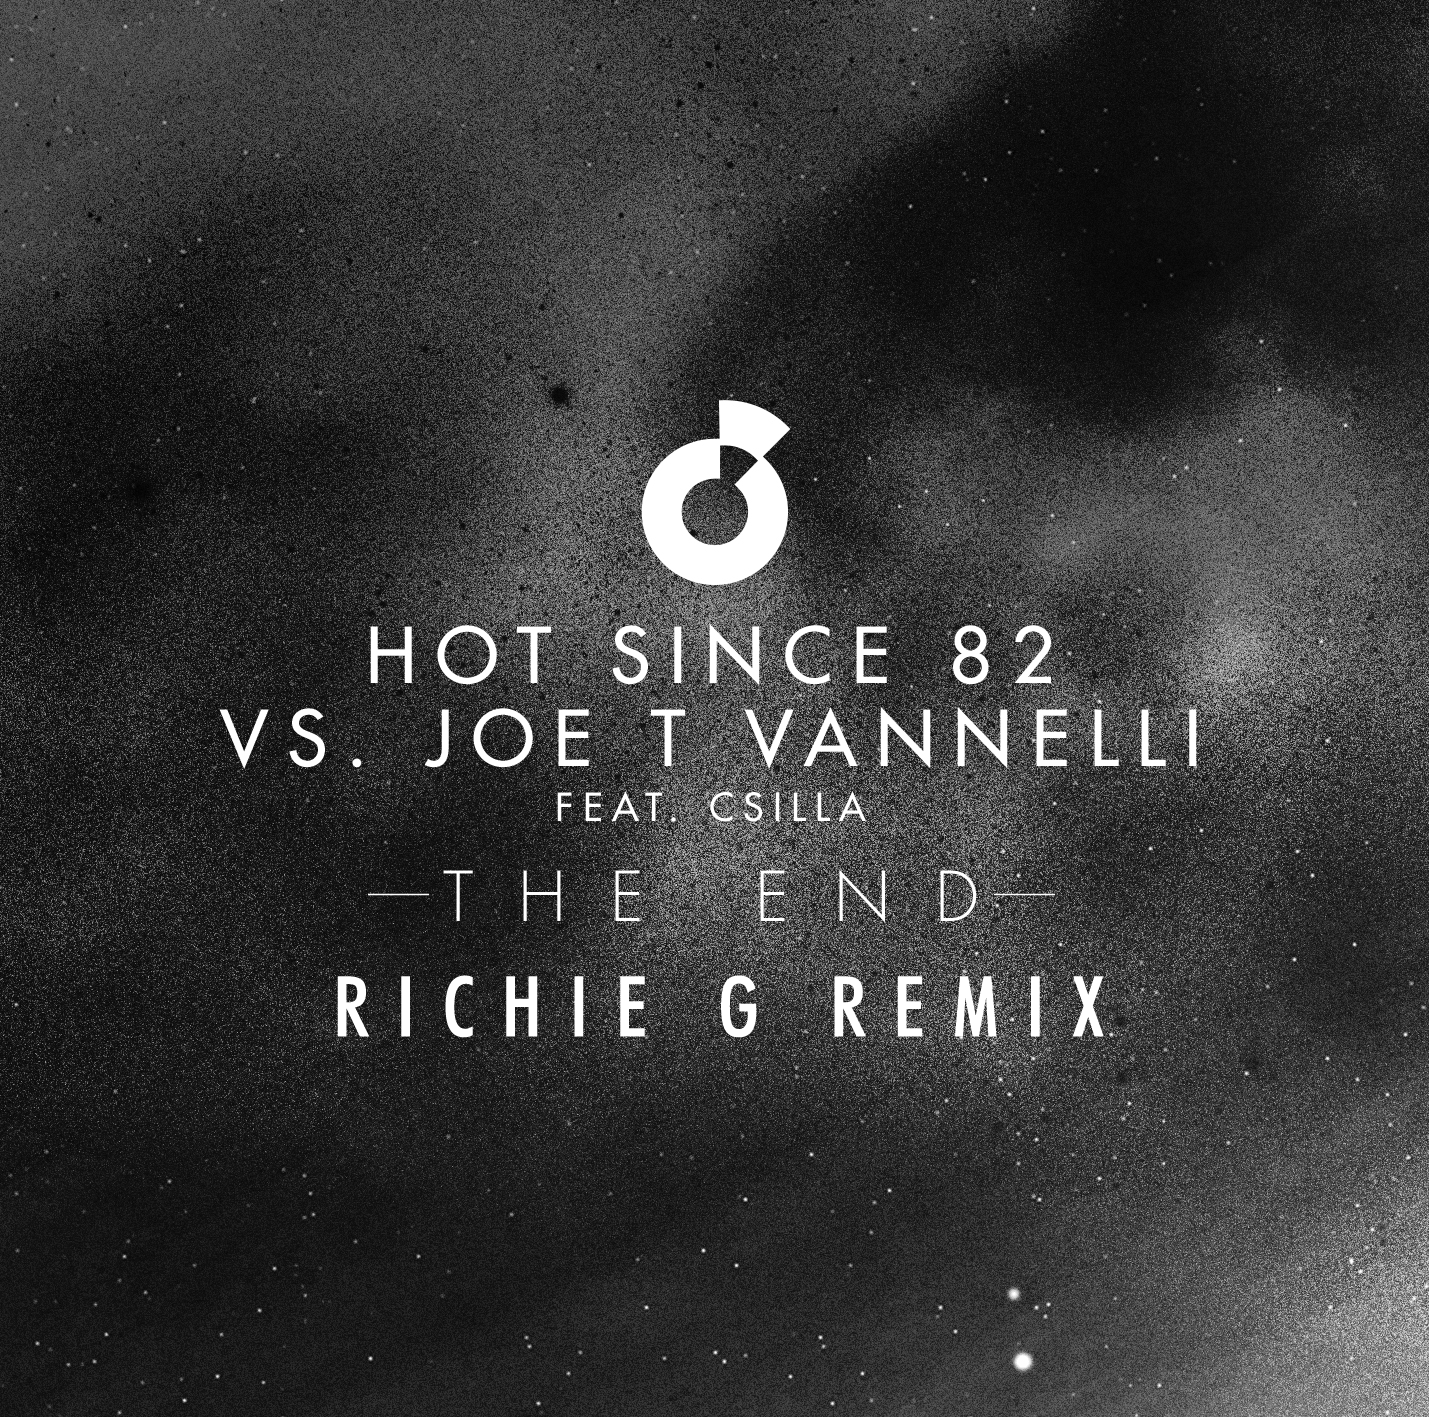 Hot since. Joe Vannelli. End Remix. Hot since 82. Joe t Vanelli feat Csilla Play with the Voice 1998 мшмф ем.